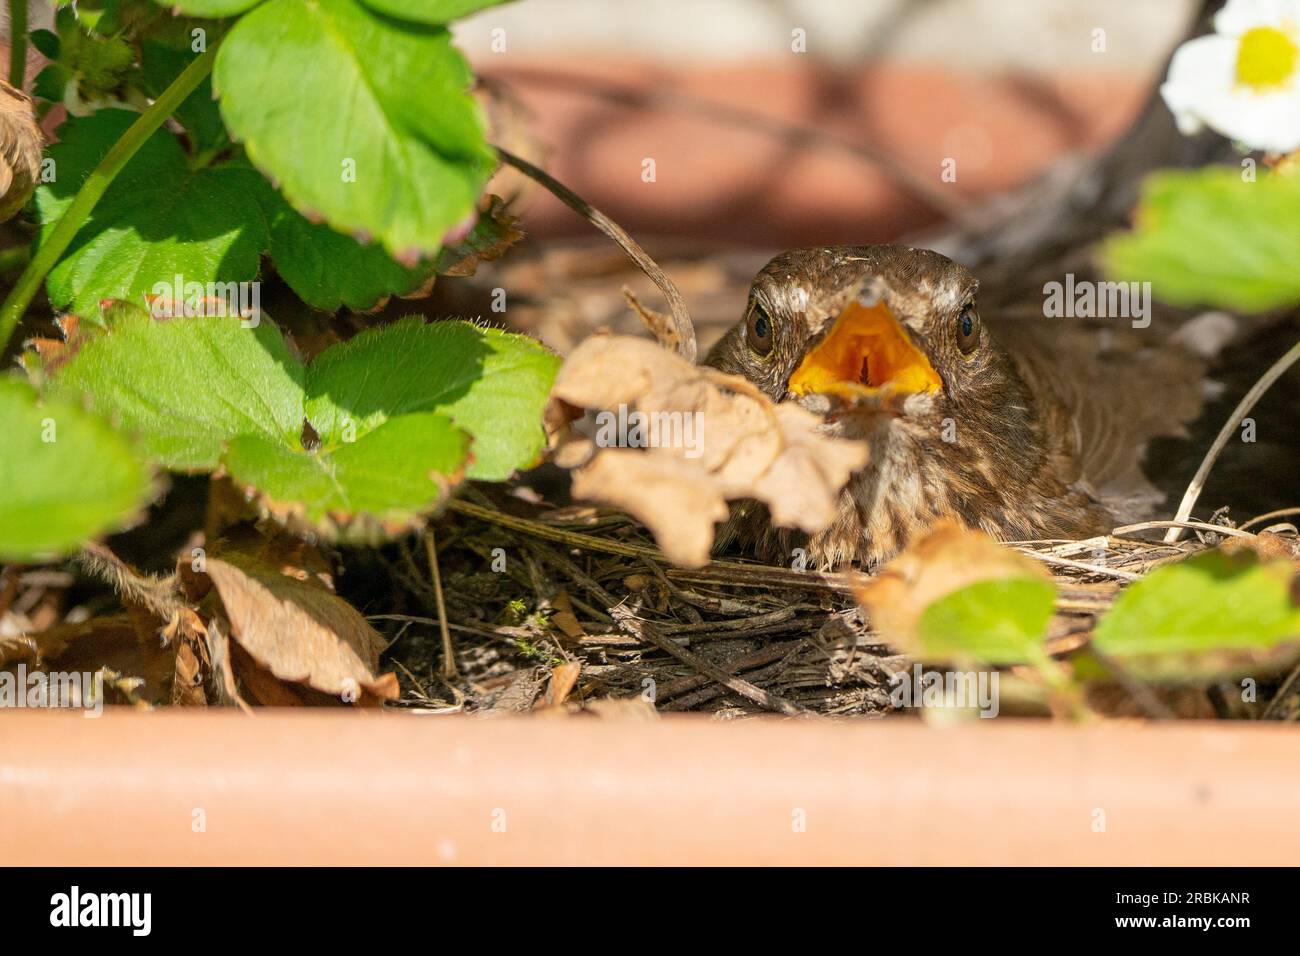 Female blackbird sitting on its eggs in a balcony box compensating the temperature by opening its beak wide Stock Photo